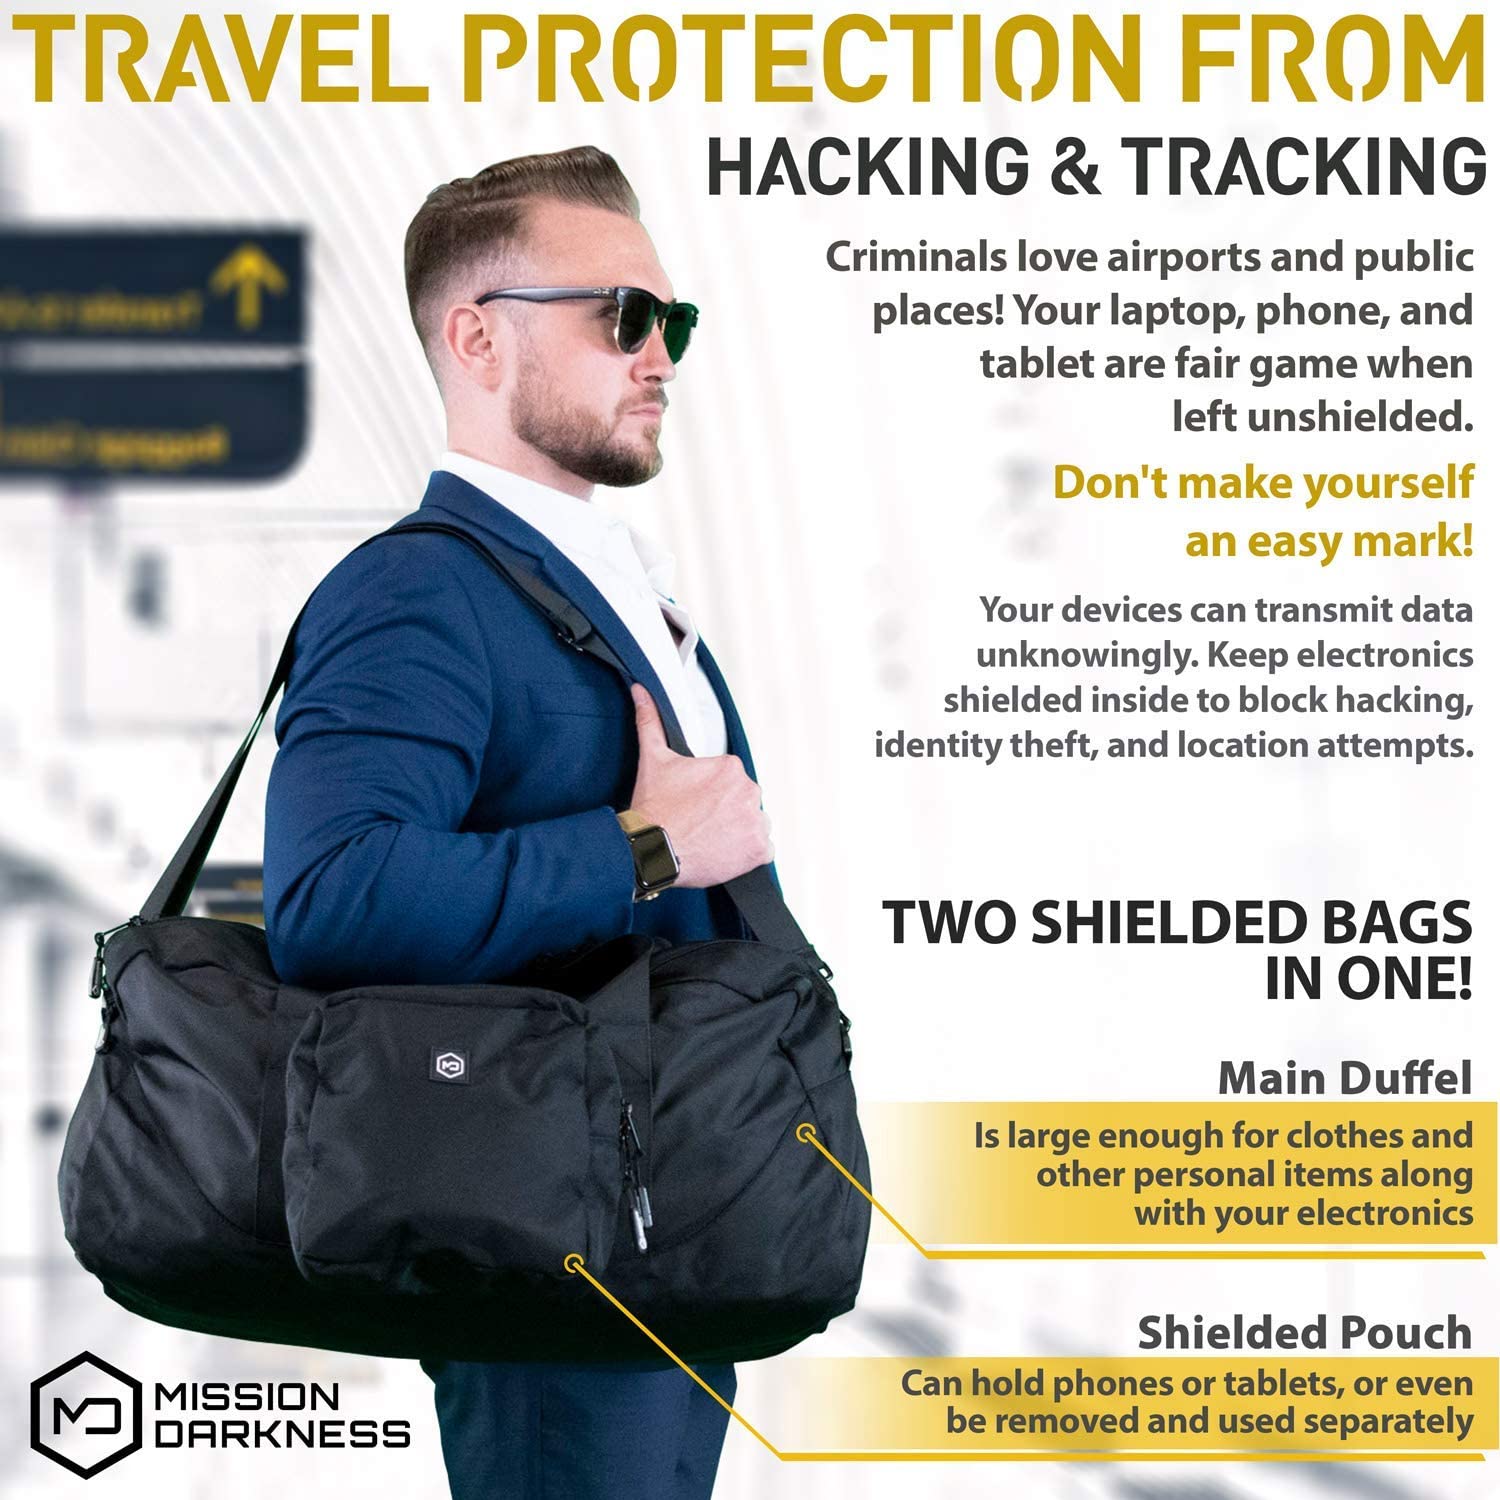 Mission Darkness Protected Traveler Faraday Bag Bundle - Collection Includes 1 Phone Bag +1 Faraday Duffel Bag with MOLLE Pouch. RF Shielding, EMF Reduction, EMP Protection, Anti-Tracking & Hacking.